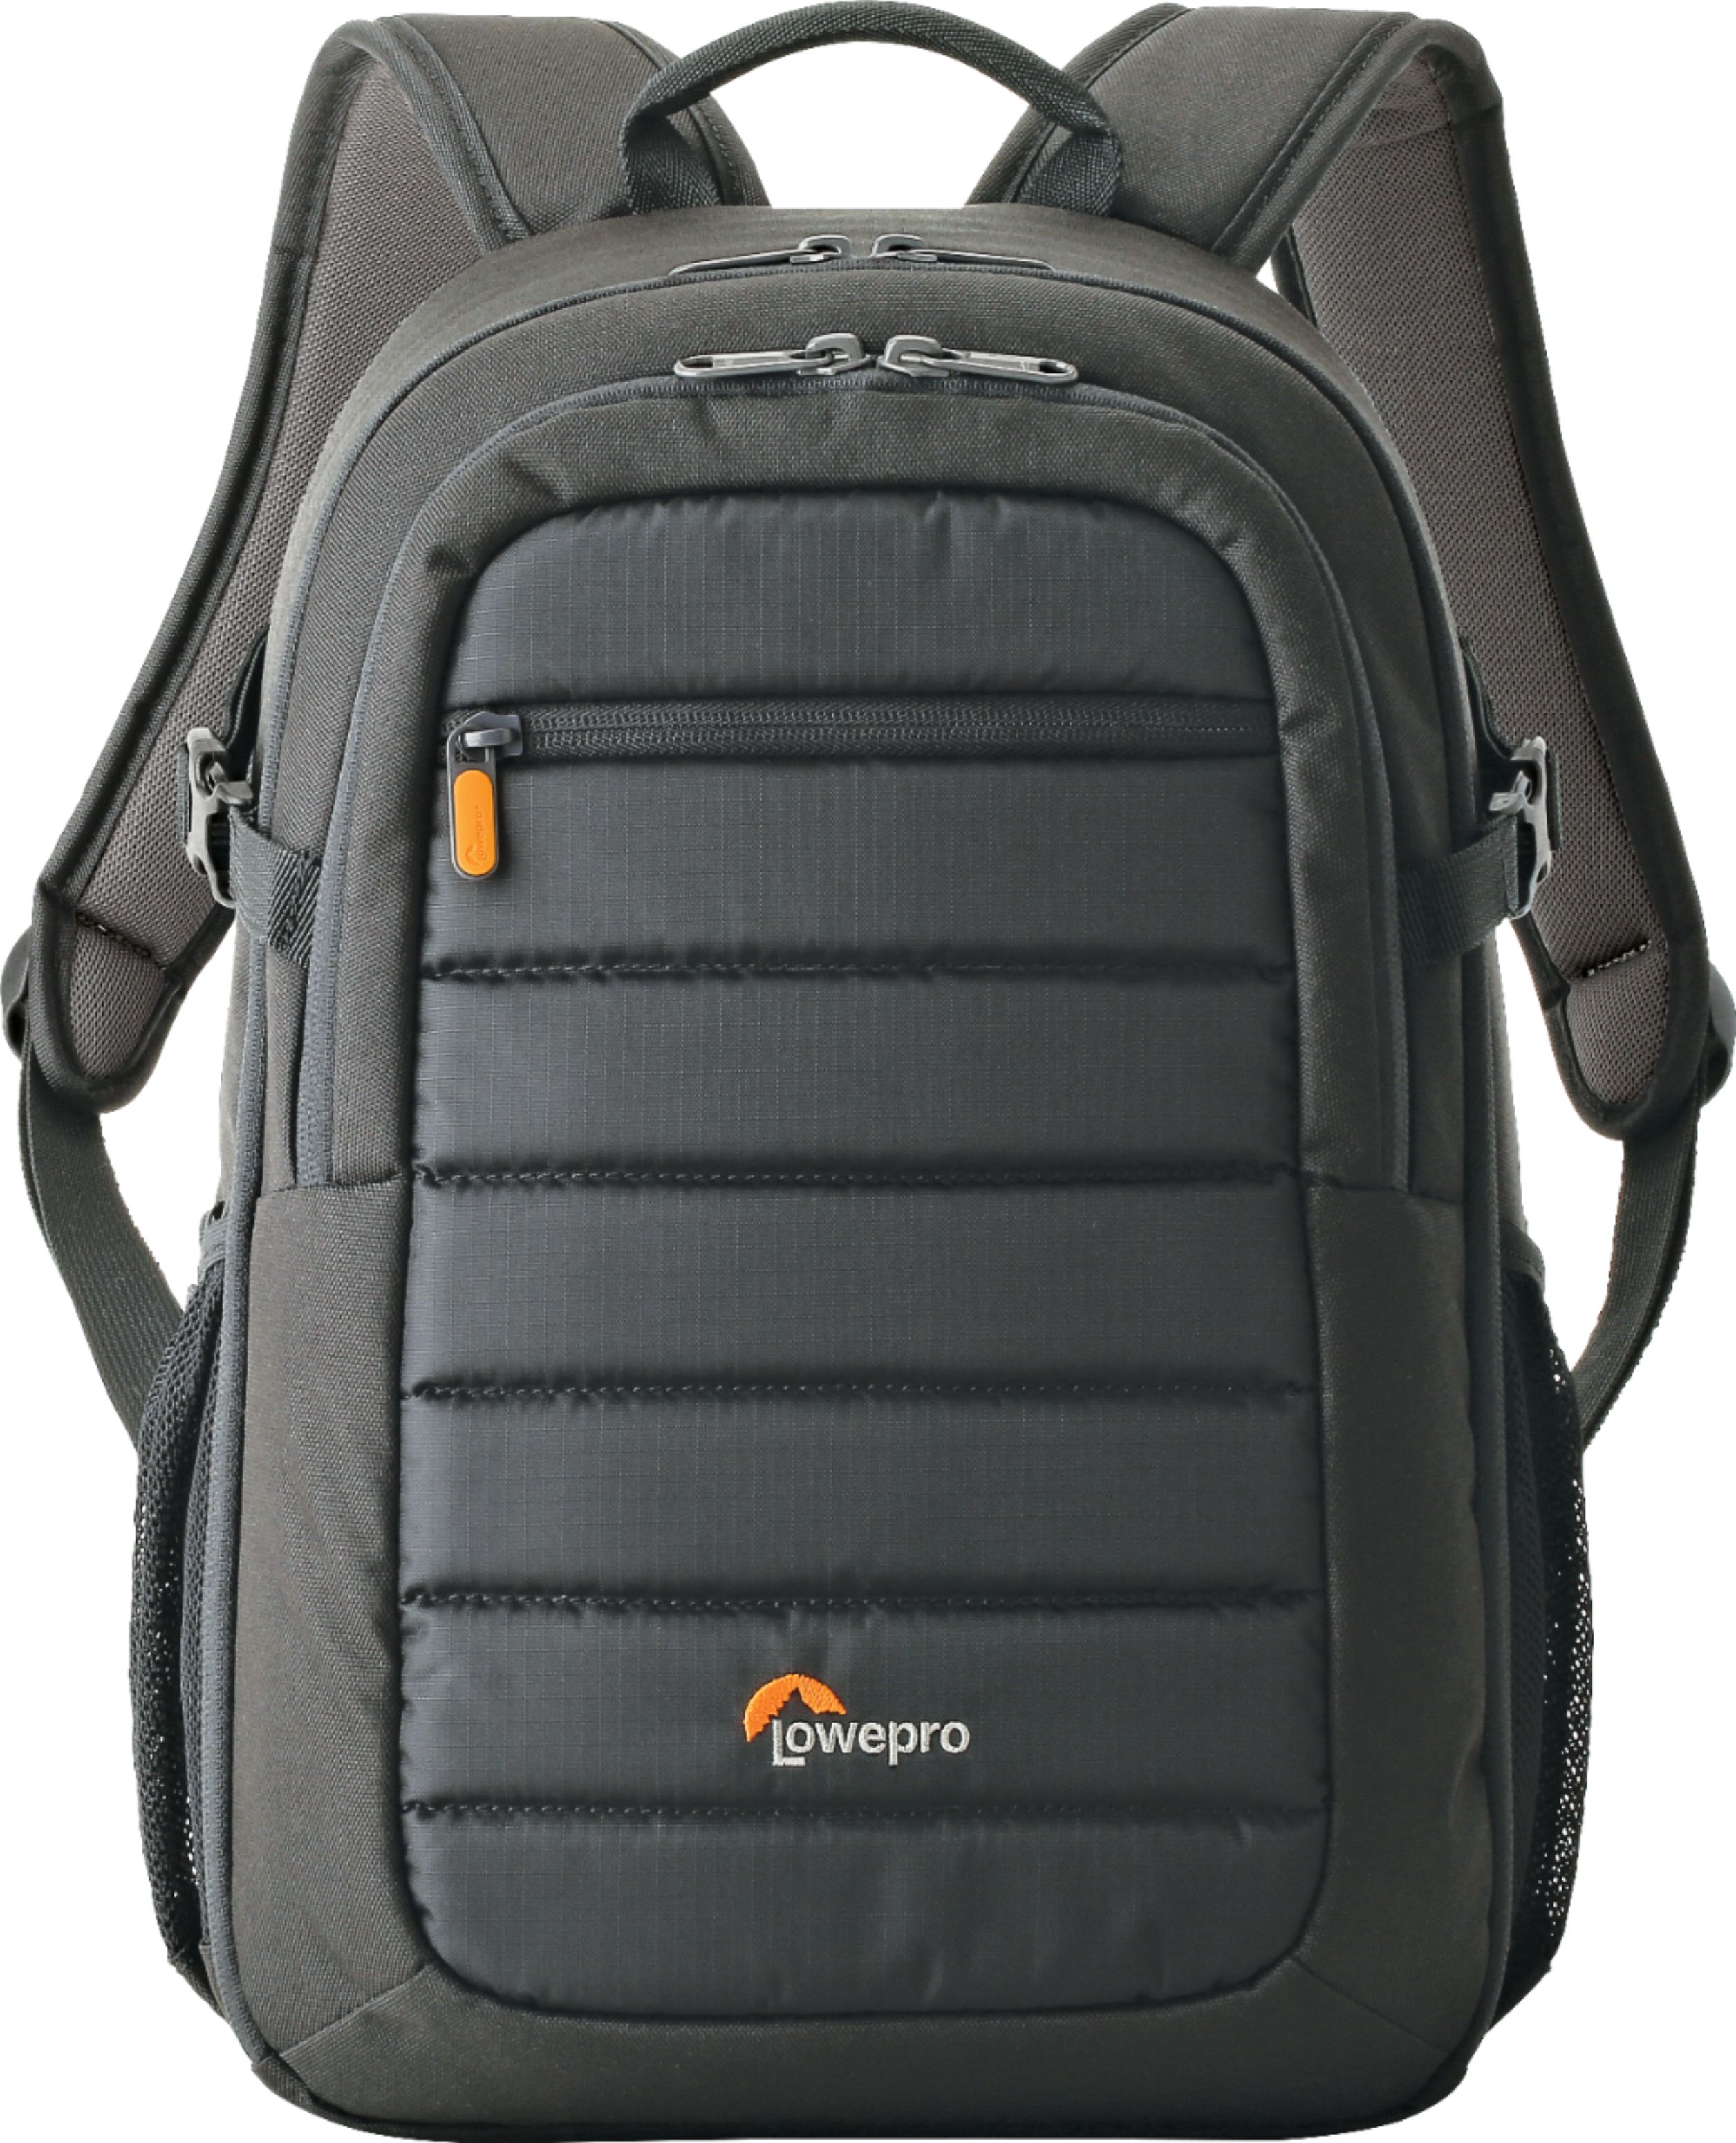 Angle View: Lowepro - Tahoe BP 150 Camera Backpack-Charcoal - Gray